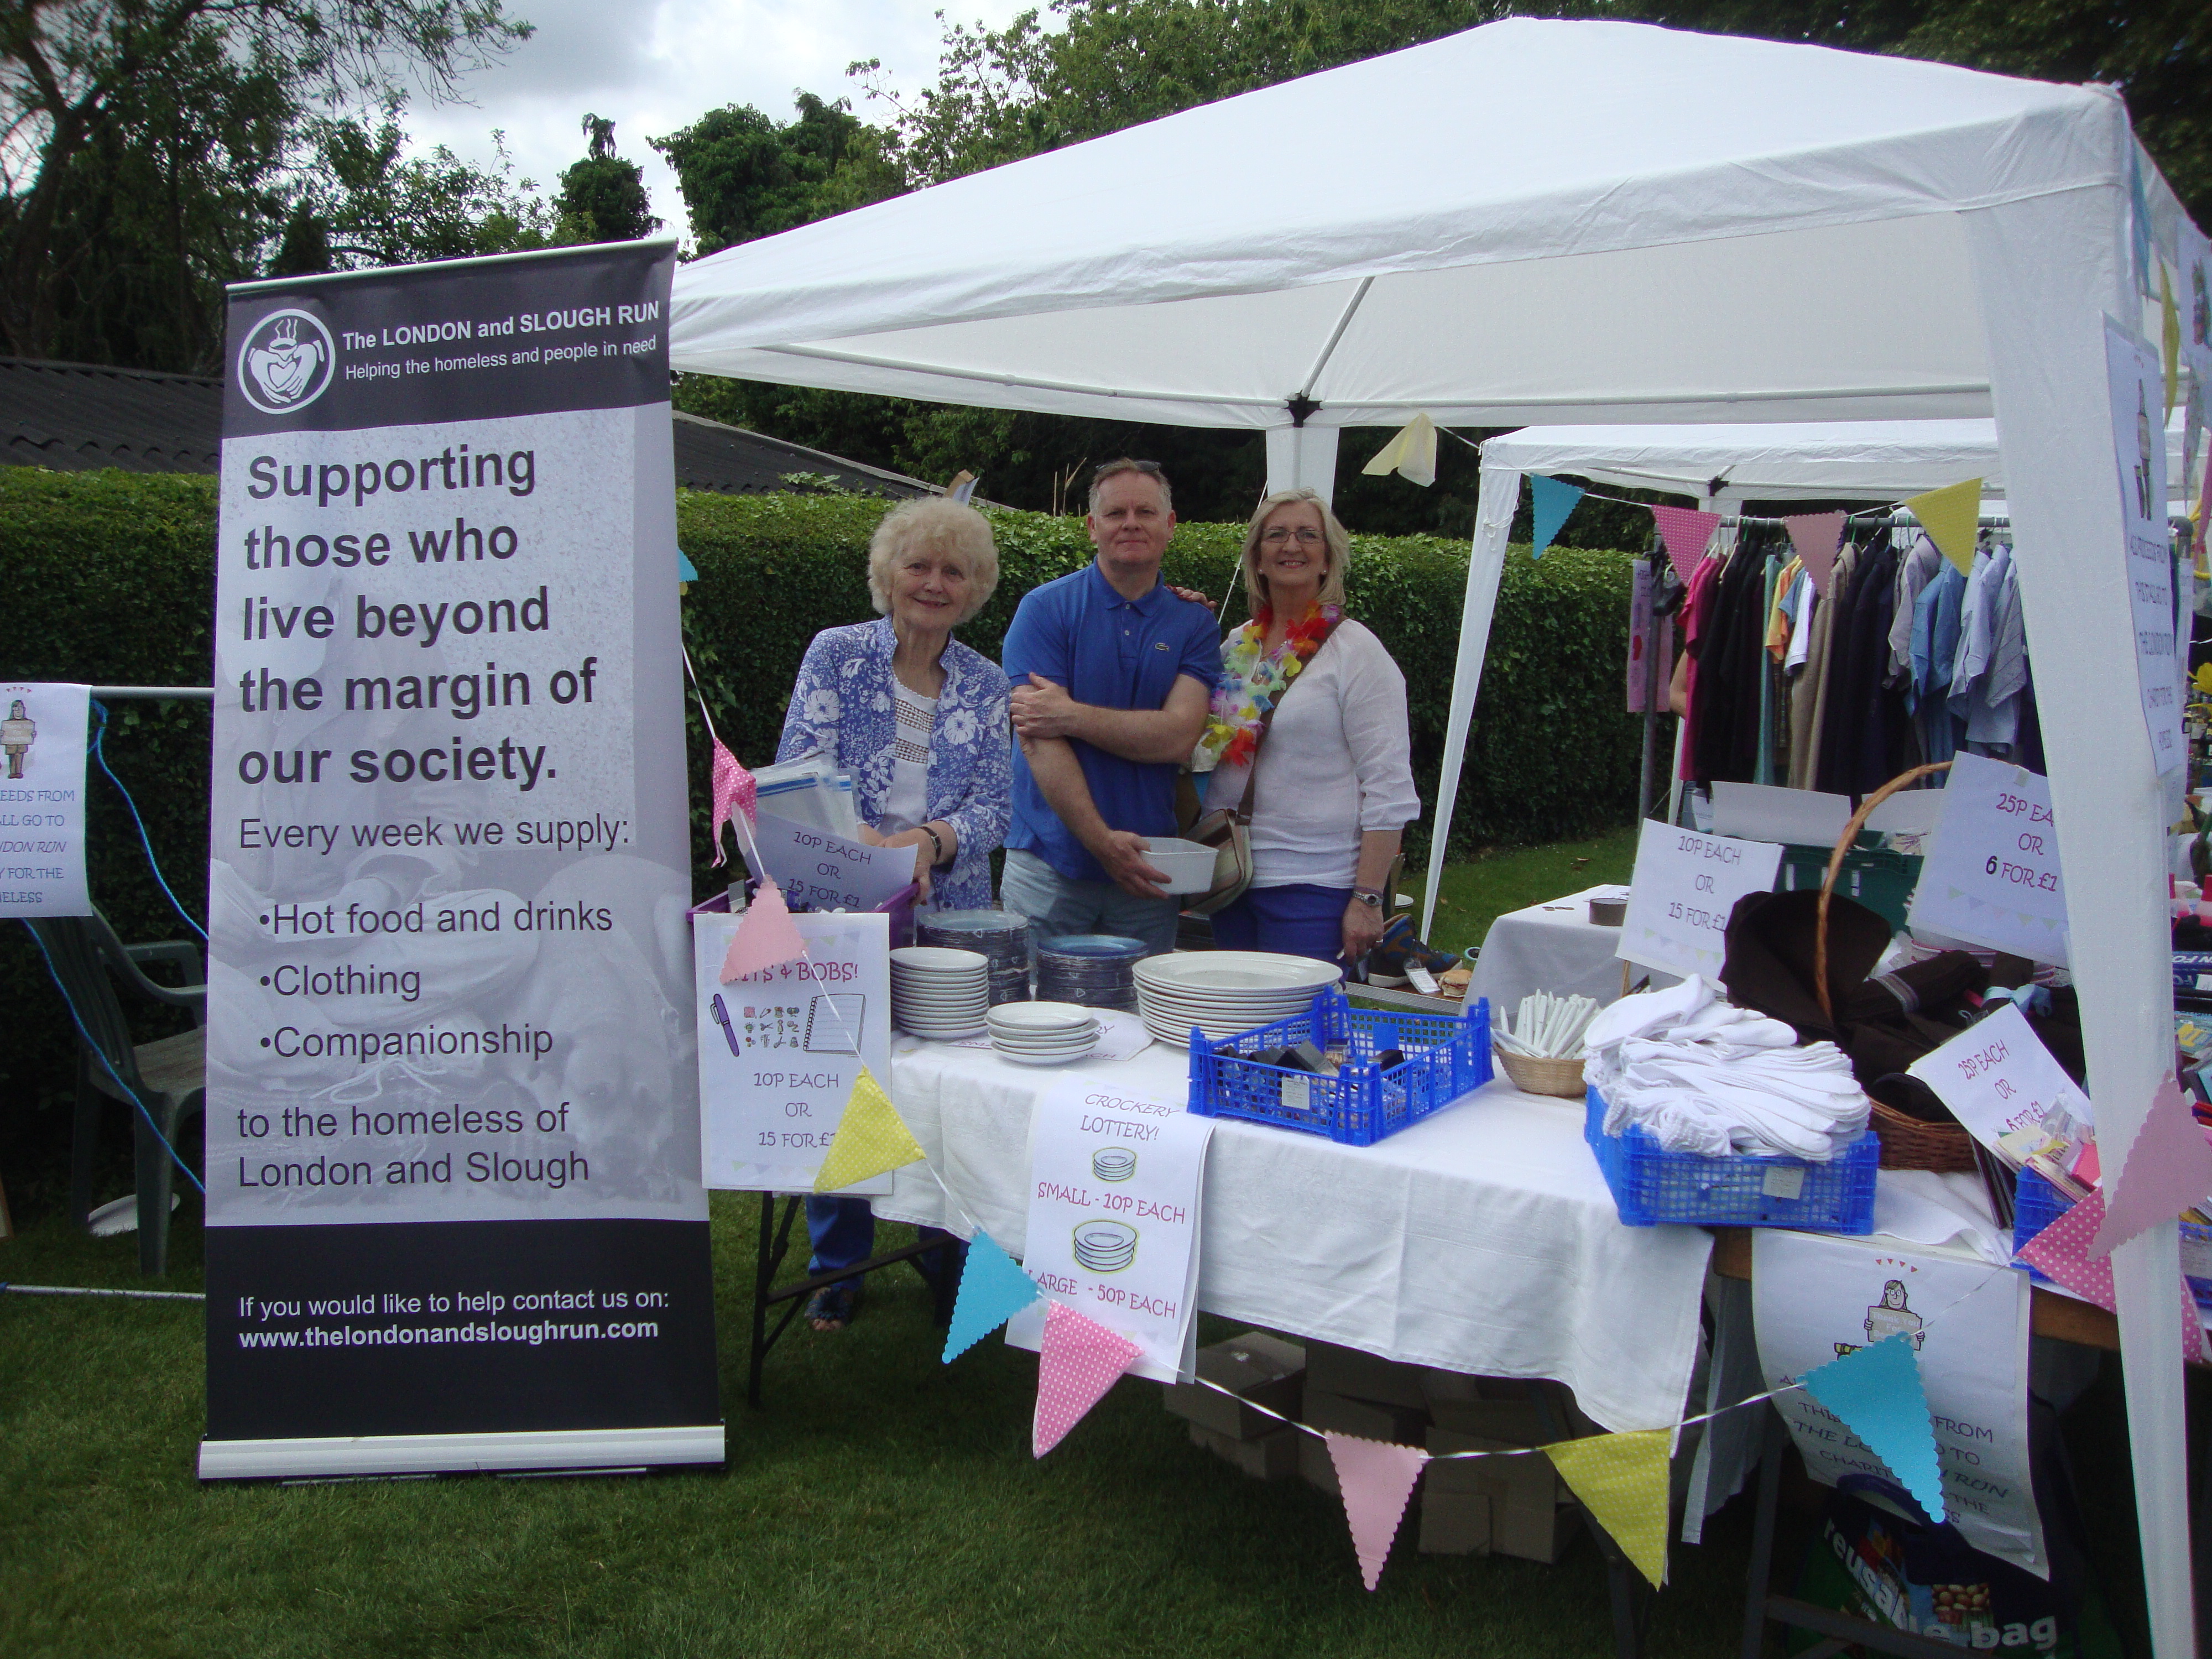 Volunteers manning a London and Slough Run stall at St Joseph’s fete in Gerrards Cross. Thank You!